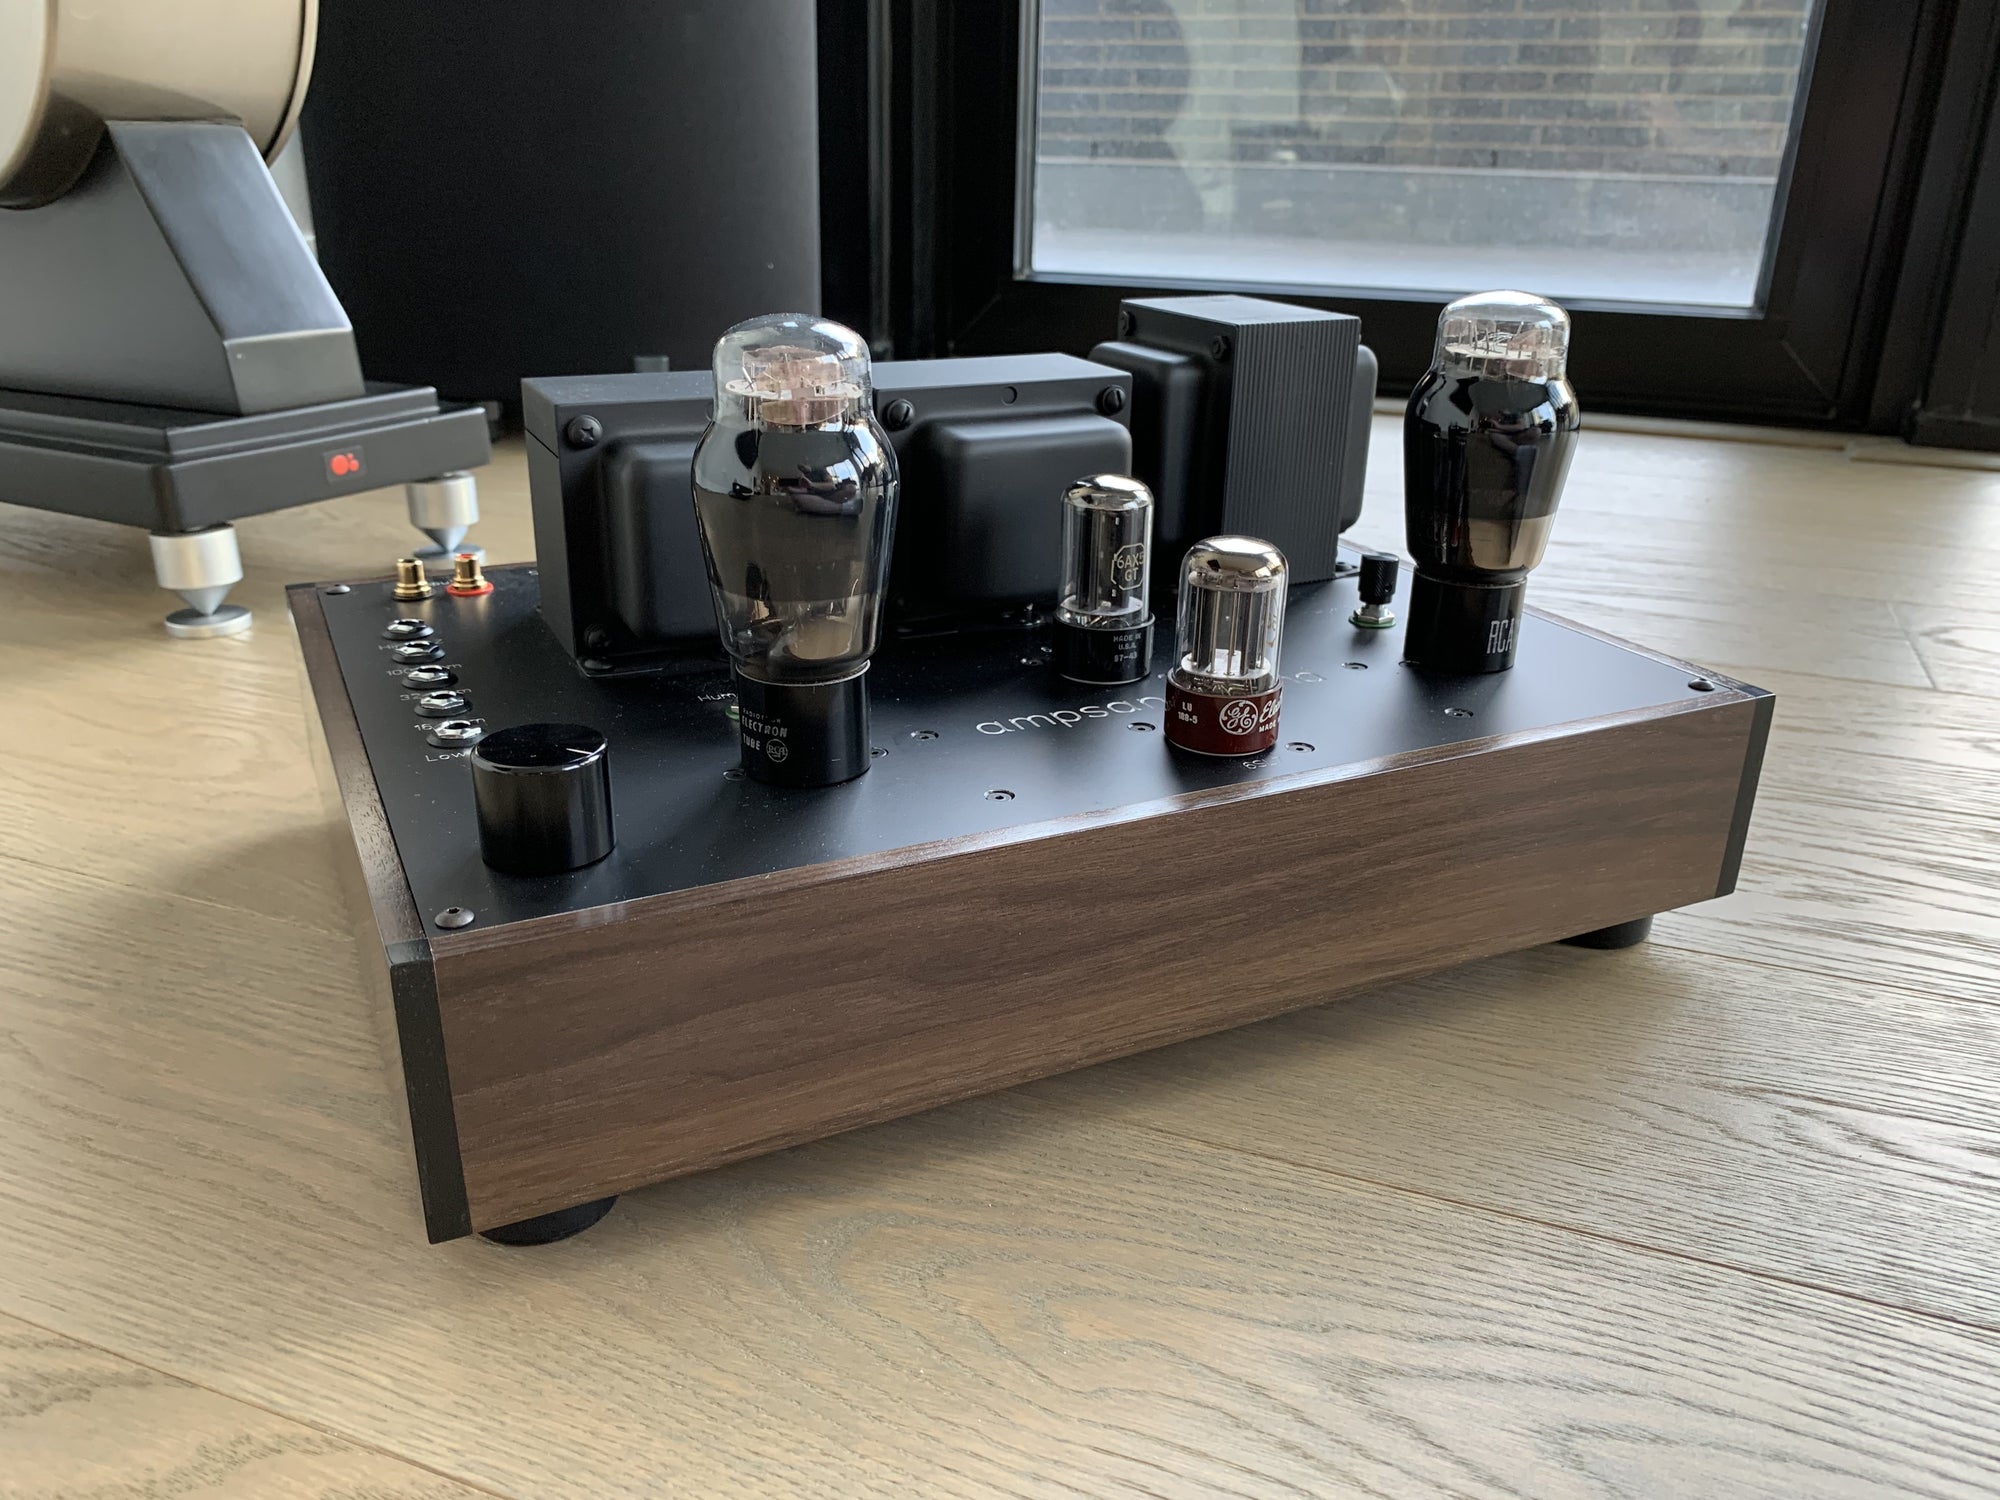 Rockwell Amplifier by ampsandsound